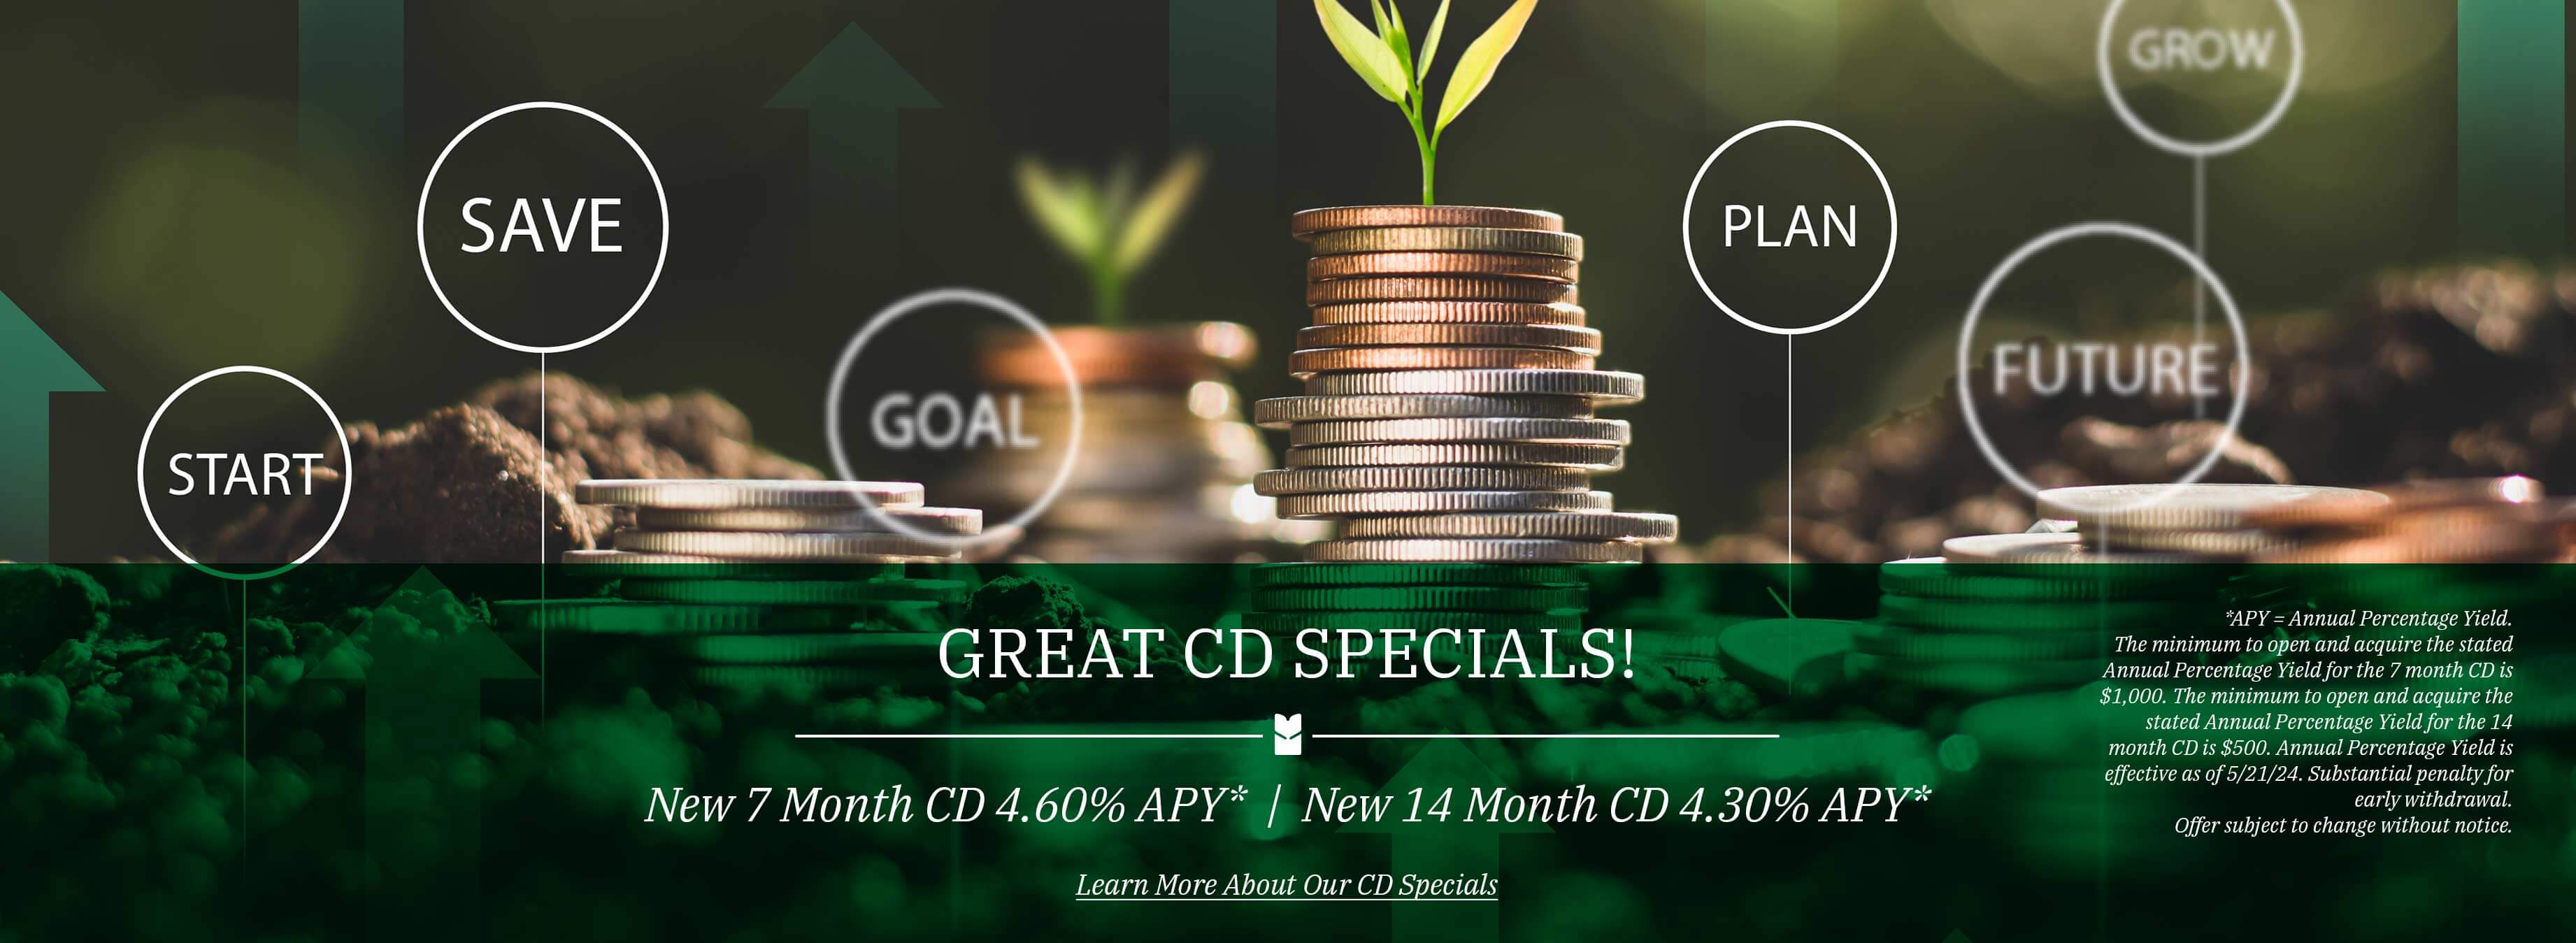 Great CD Specials! New 7 Month CD 4.60% APY. New 14 Month CD 4.30% APY. Learn more about our CD specials. *APY = Annual Percentage Yield. The minimum to open and acquire the stated Annual Percentage Yield for the 7 month CD is $1,000. The minimum to open and acquire the stated Annual Percentage Yield for the 14 month CD is $500. Annual Percentage Yield is effective as of 5/21/24. Substantial penalty for early withdrawal. Offer subject to change without notice.